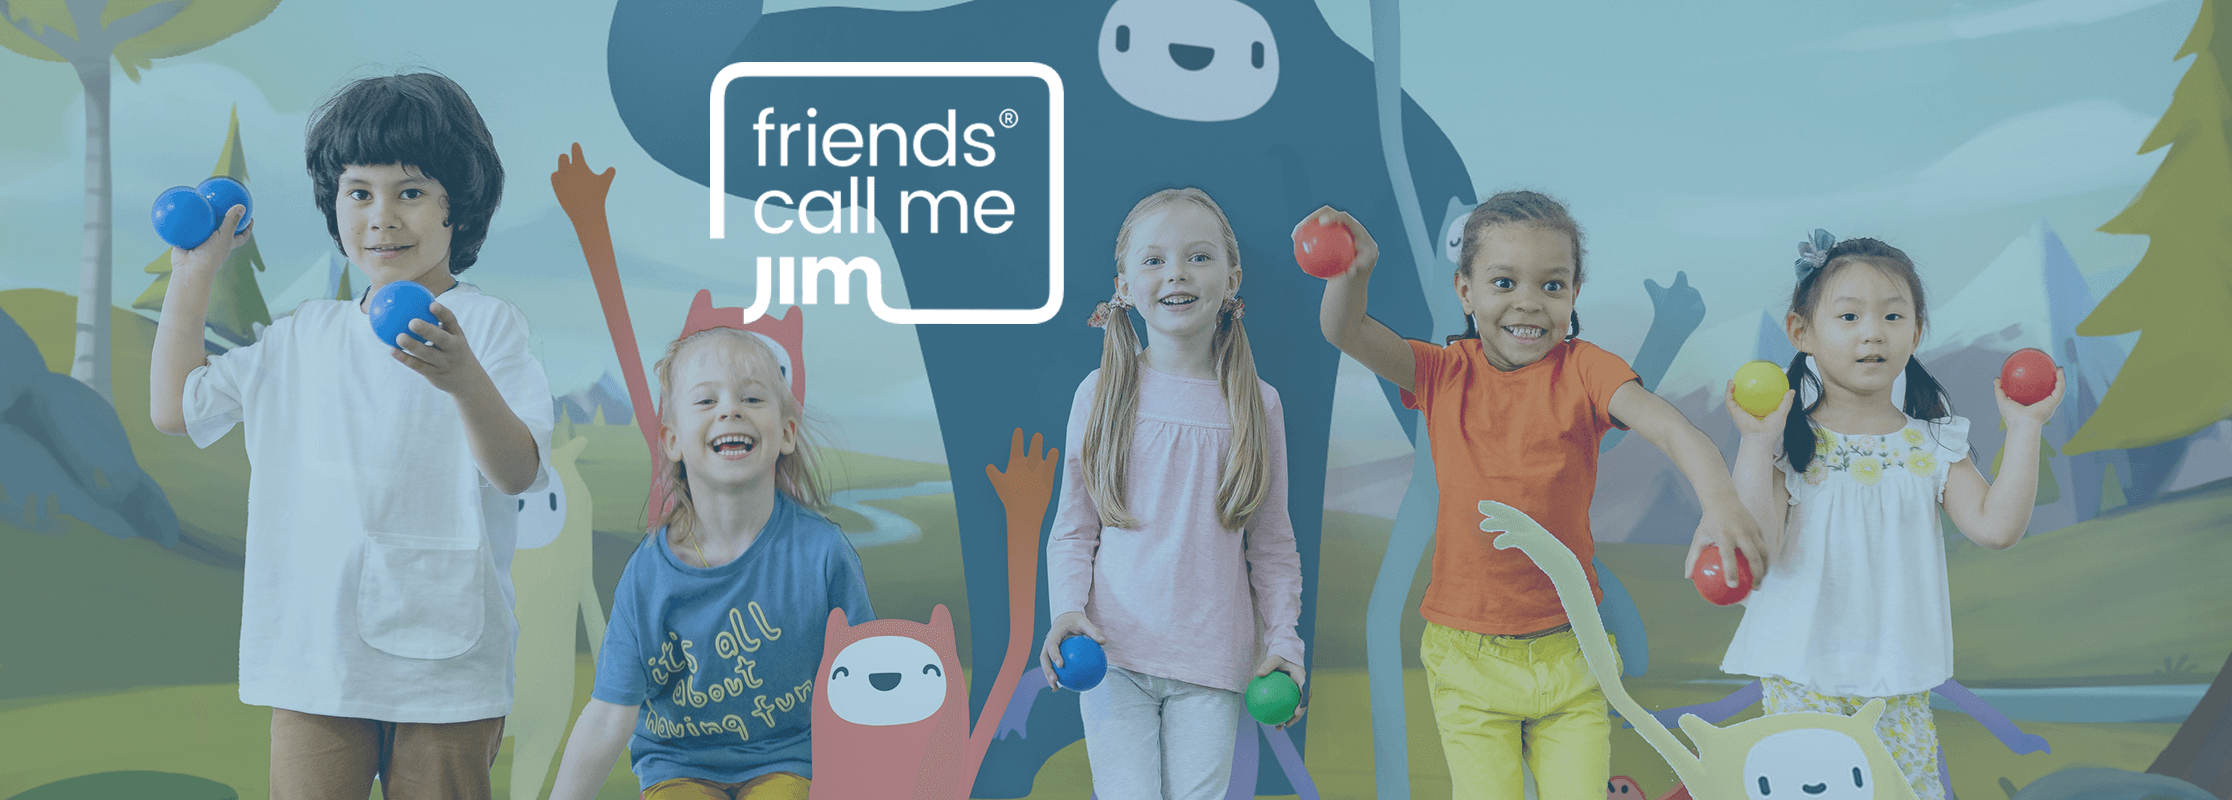 Jim Movebooks: exercise classes at daycare centers